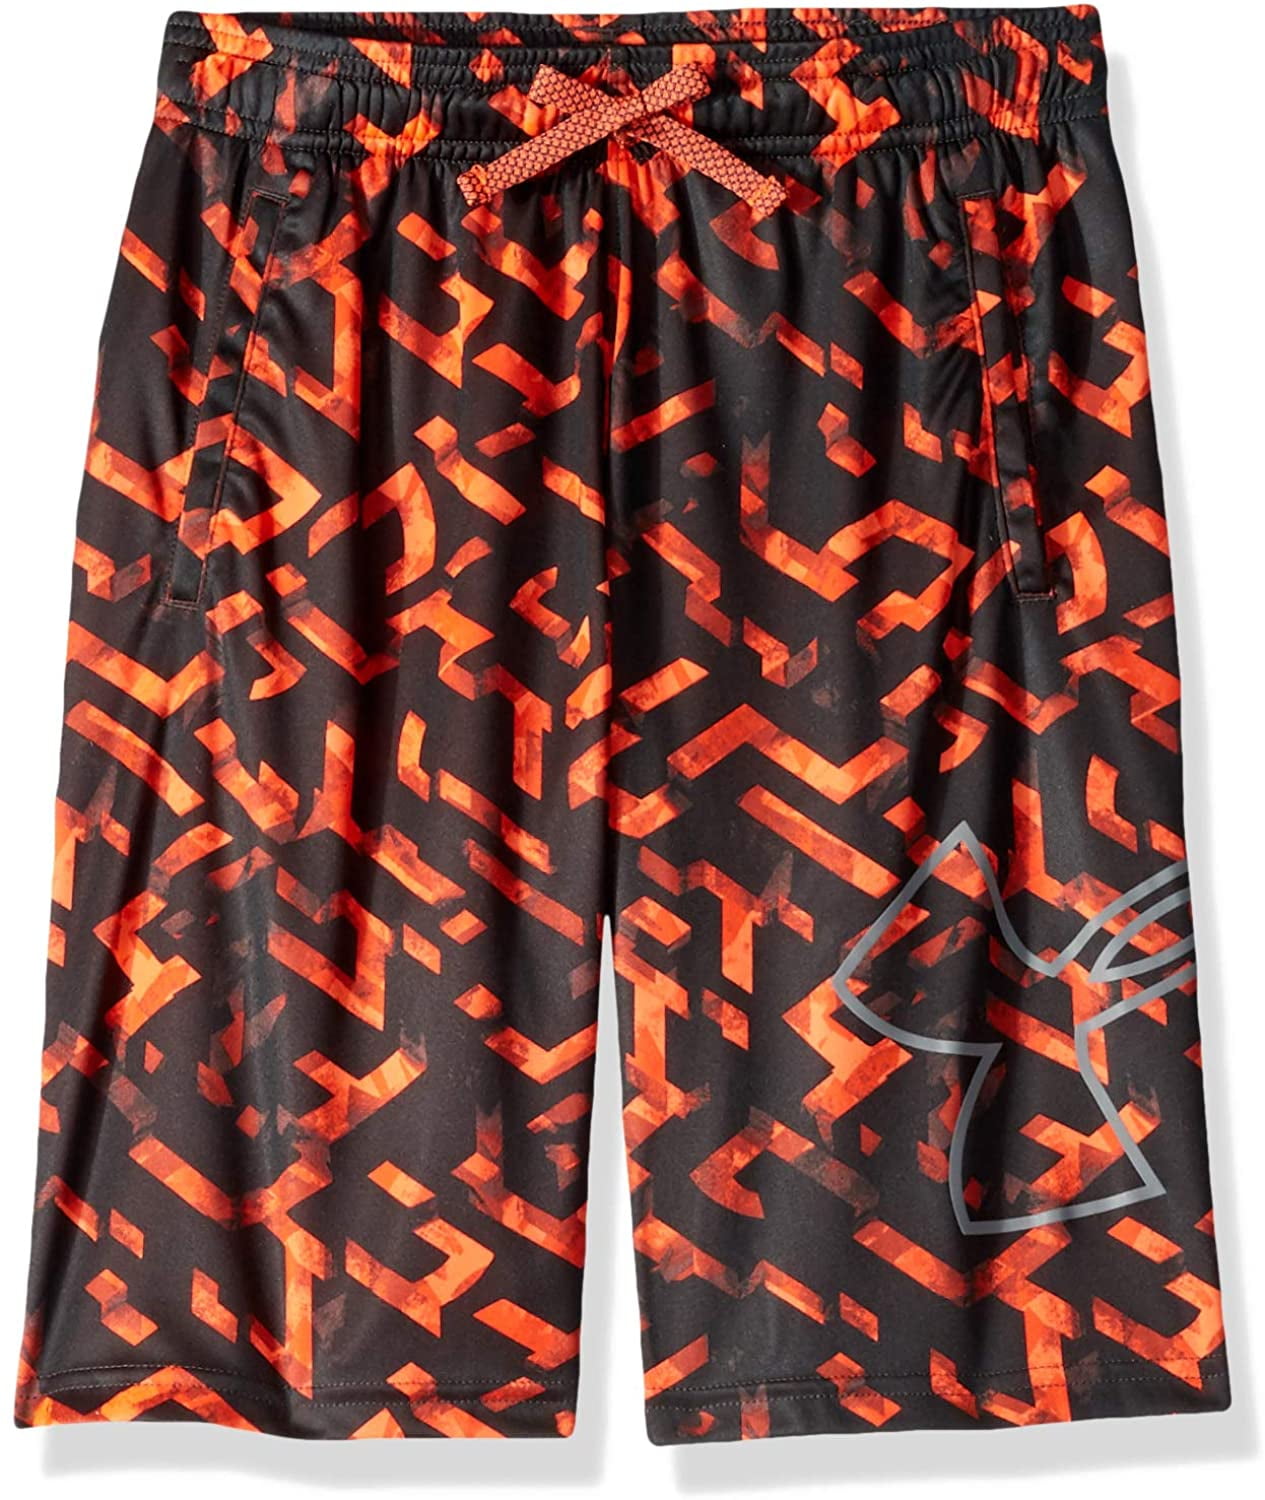 under armour youth large shorts